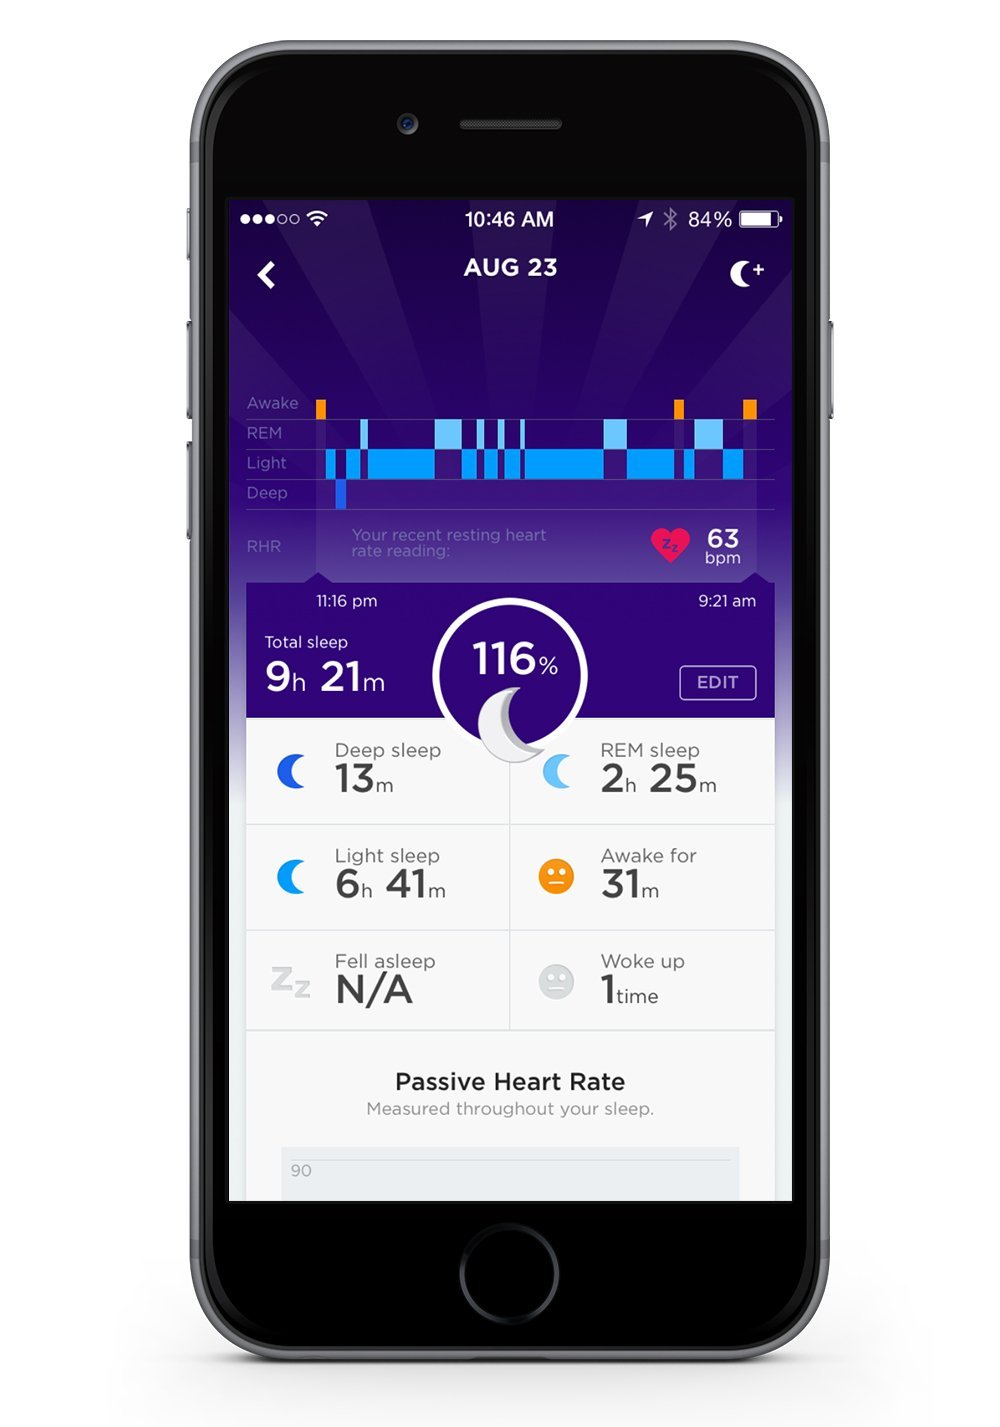 Jawbone UP3 Bluetooth Wireless Heart Rate Monitor, Sleep and Fitness Tracker - image 2 of 4